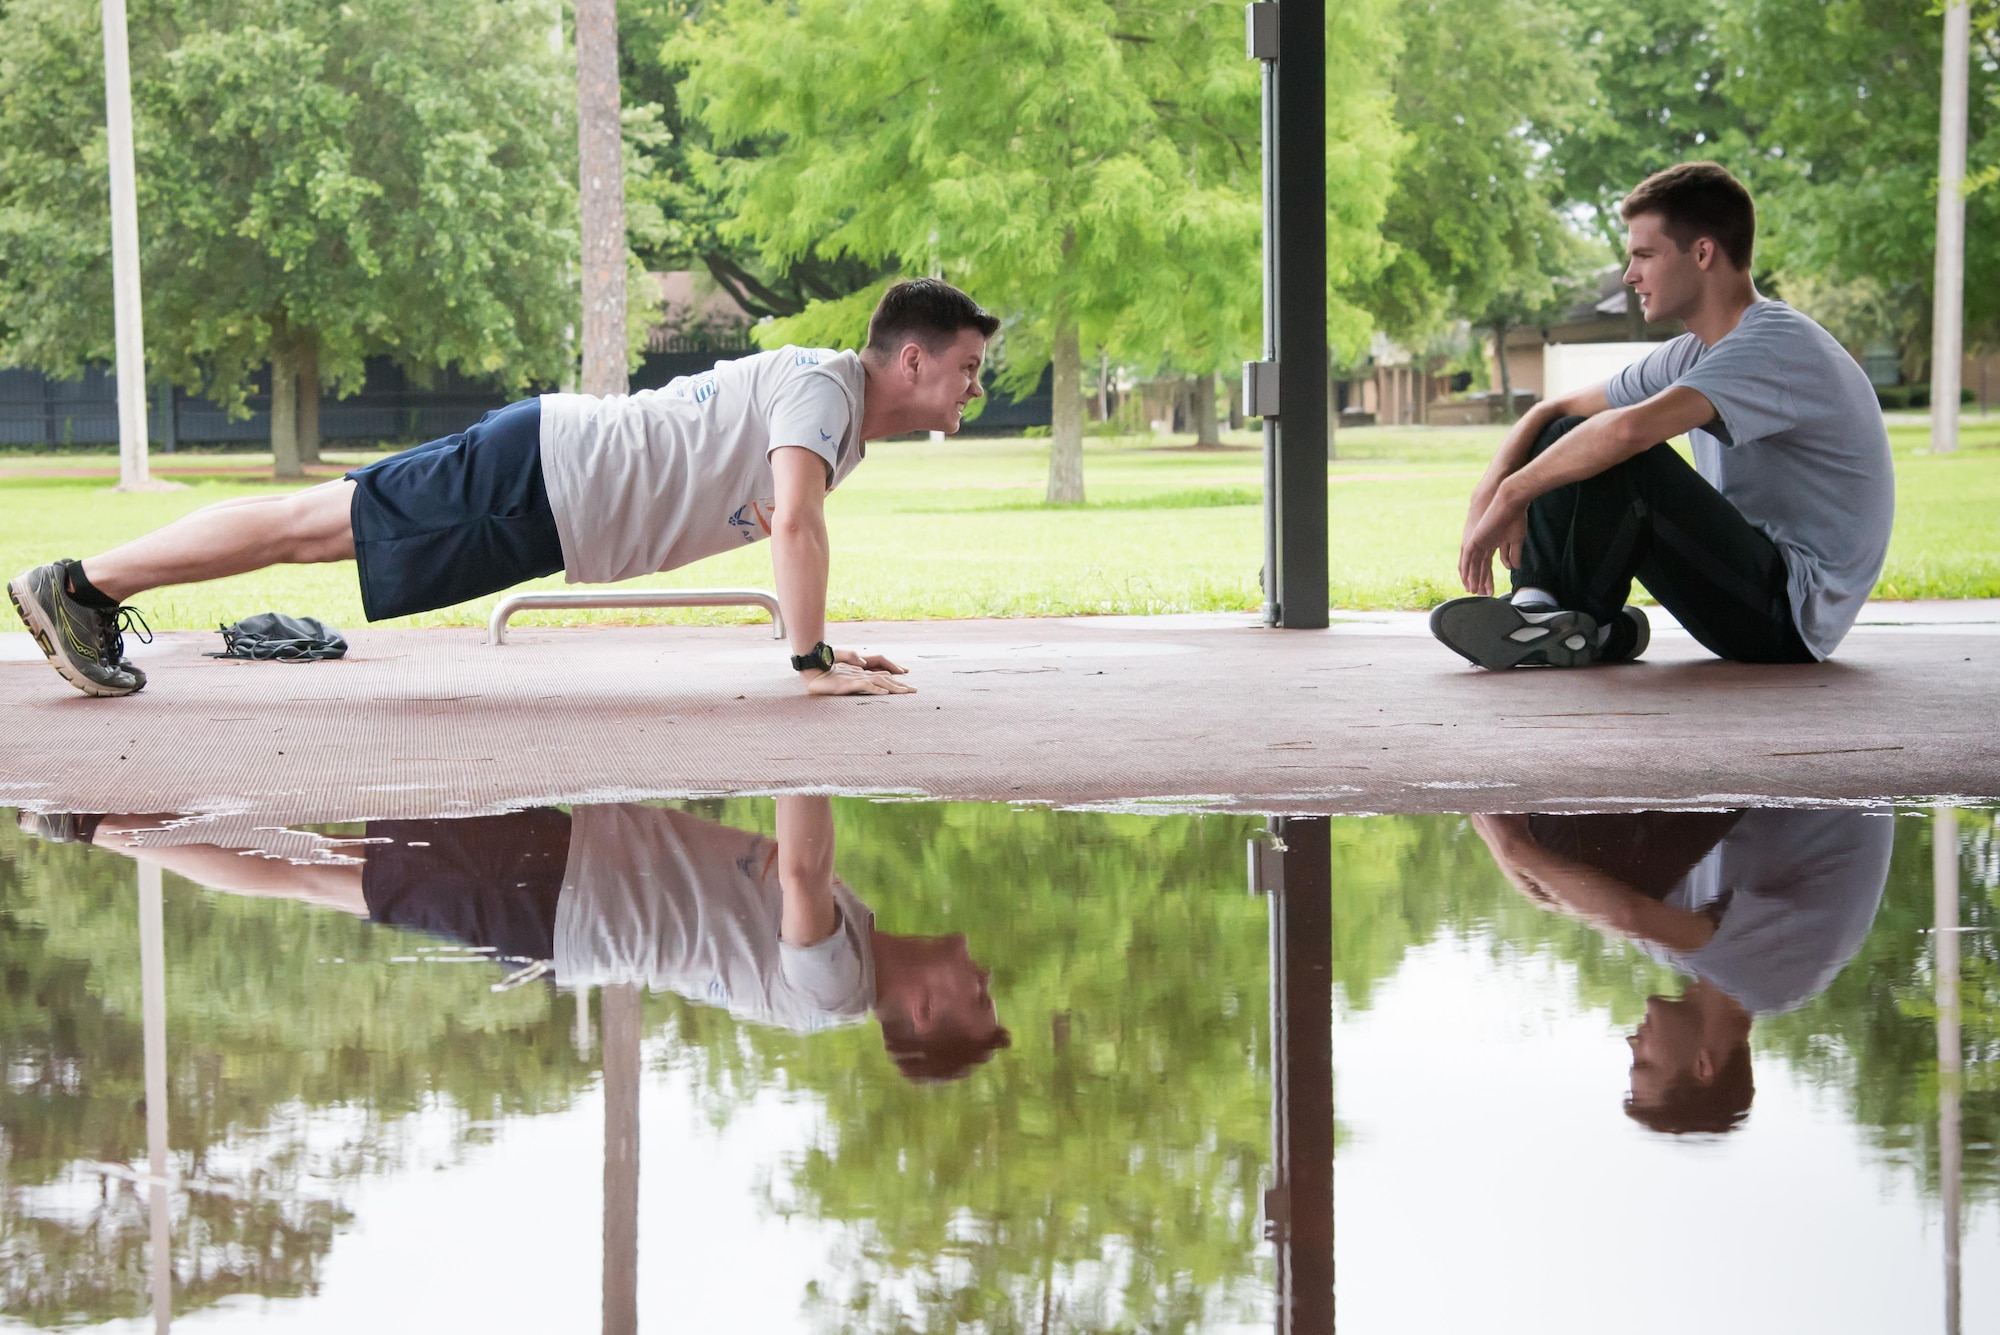 Chris Geter and Jonathan Green, 403rd Developmental and Training Flight trainees, take turns practicing pushups during a physical training session June 3, 2017 at Keesler Air Force Base, Mississippi.(U.S. Air Force photo/Staff Sgt. Heather Heiney)